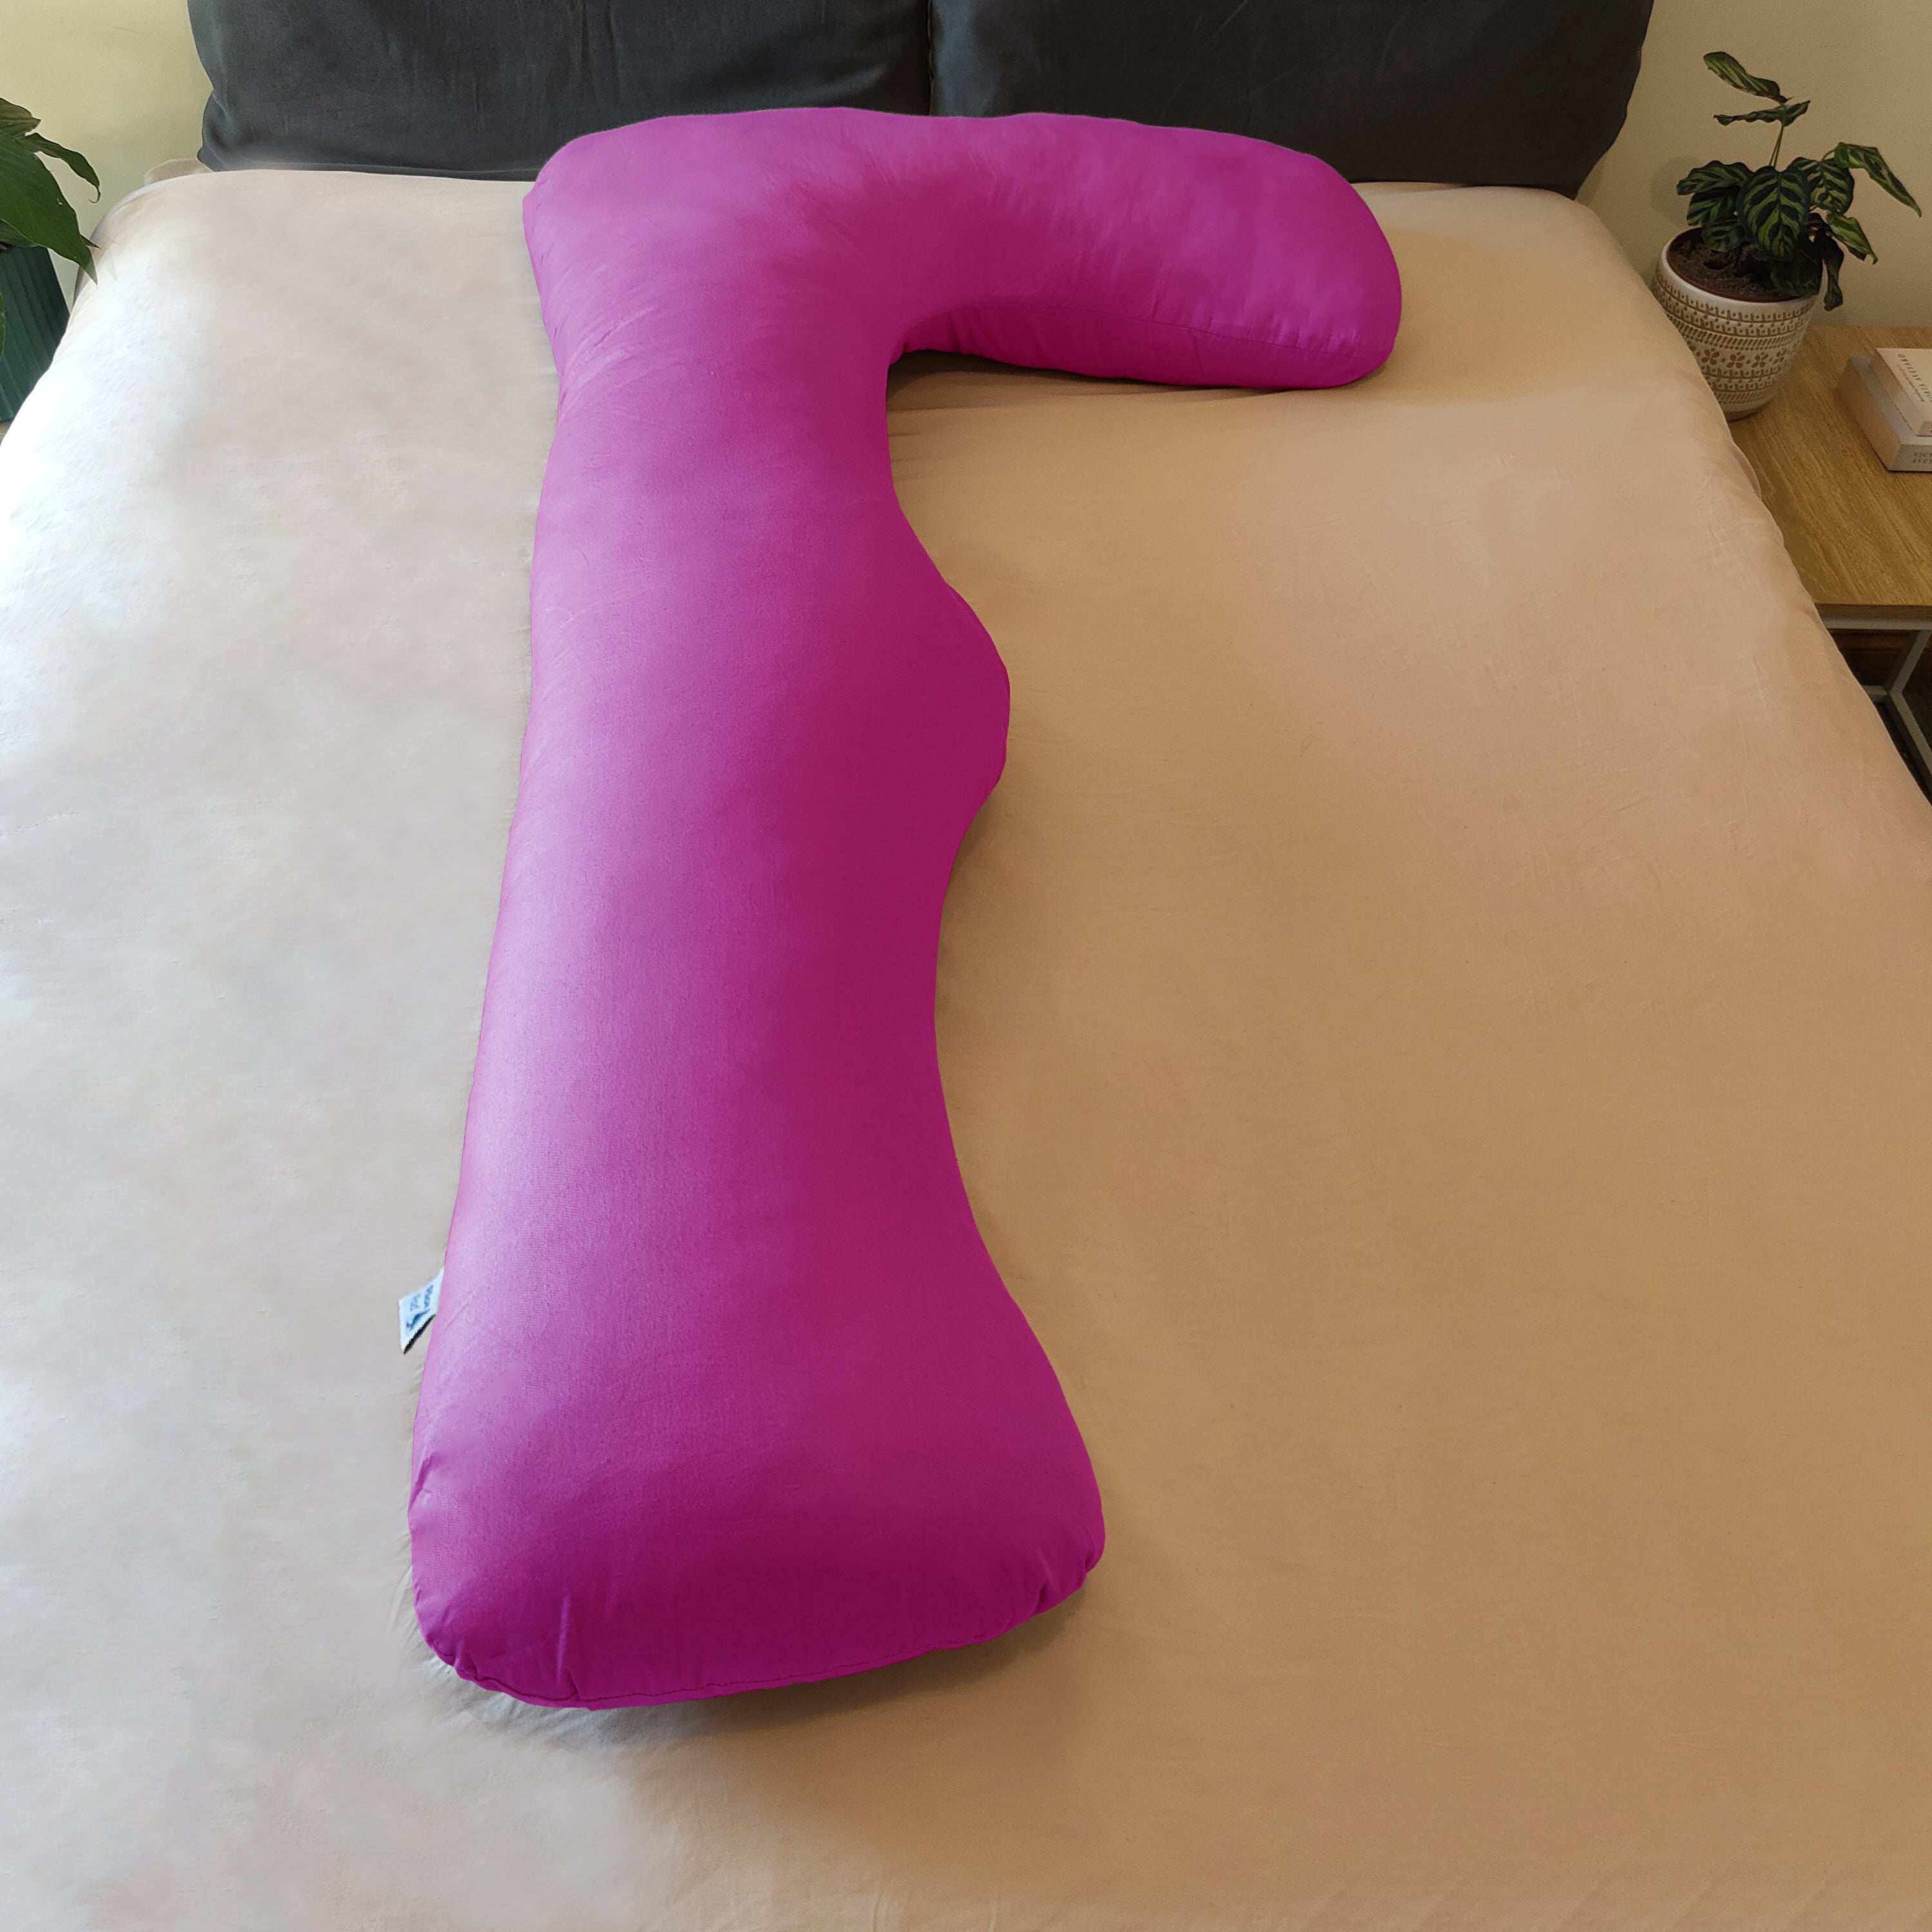 L-Shaped Support Pillow